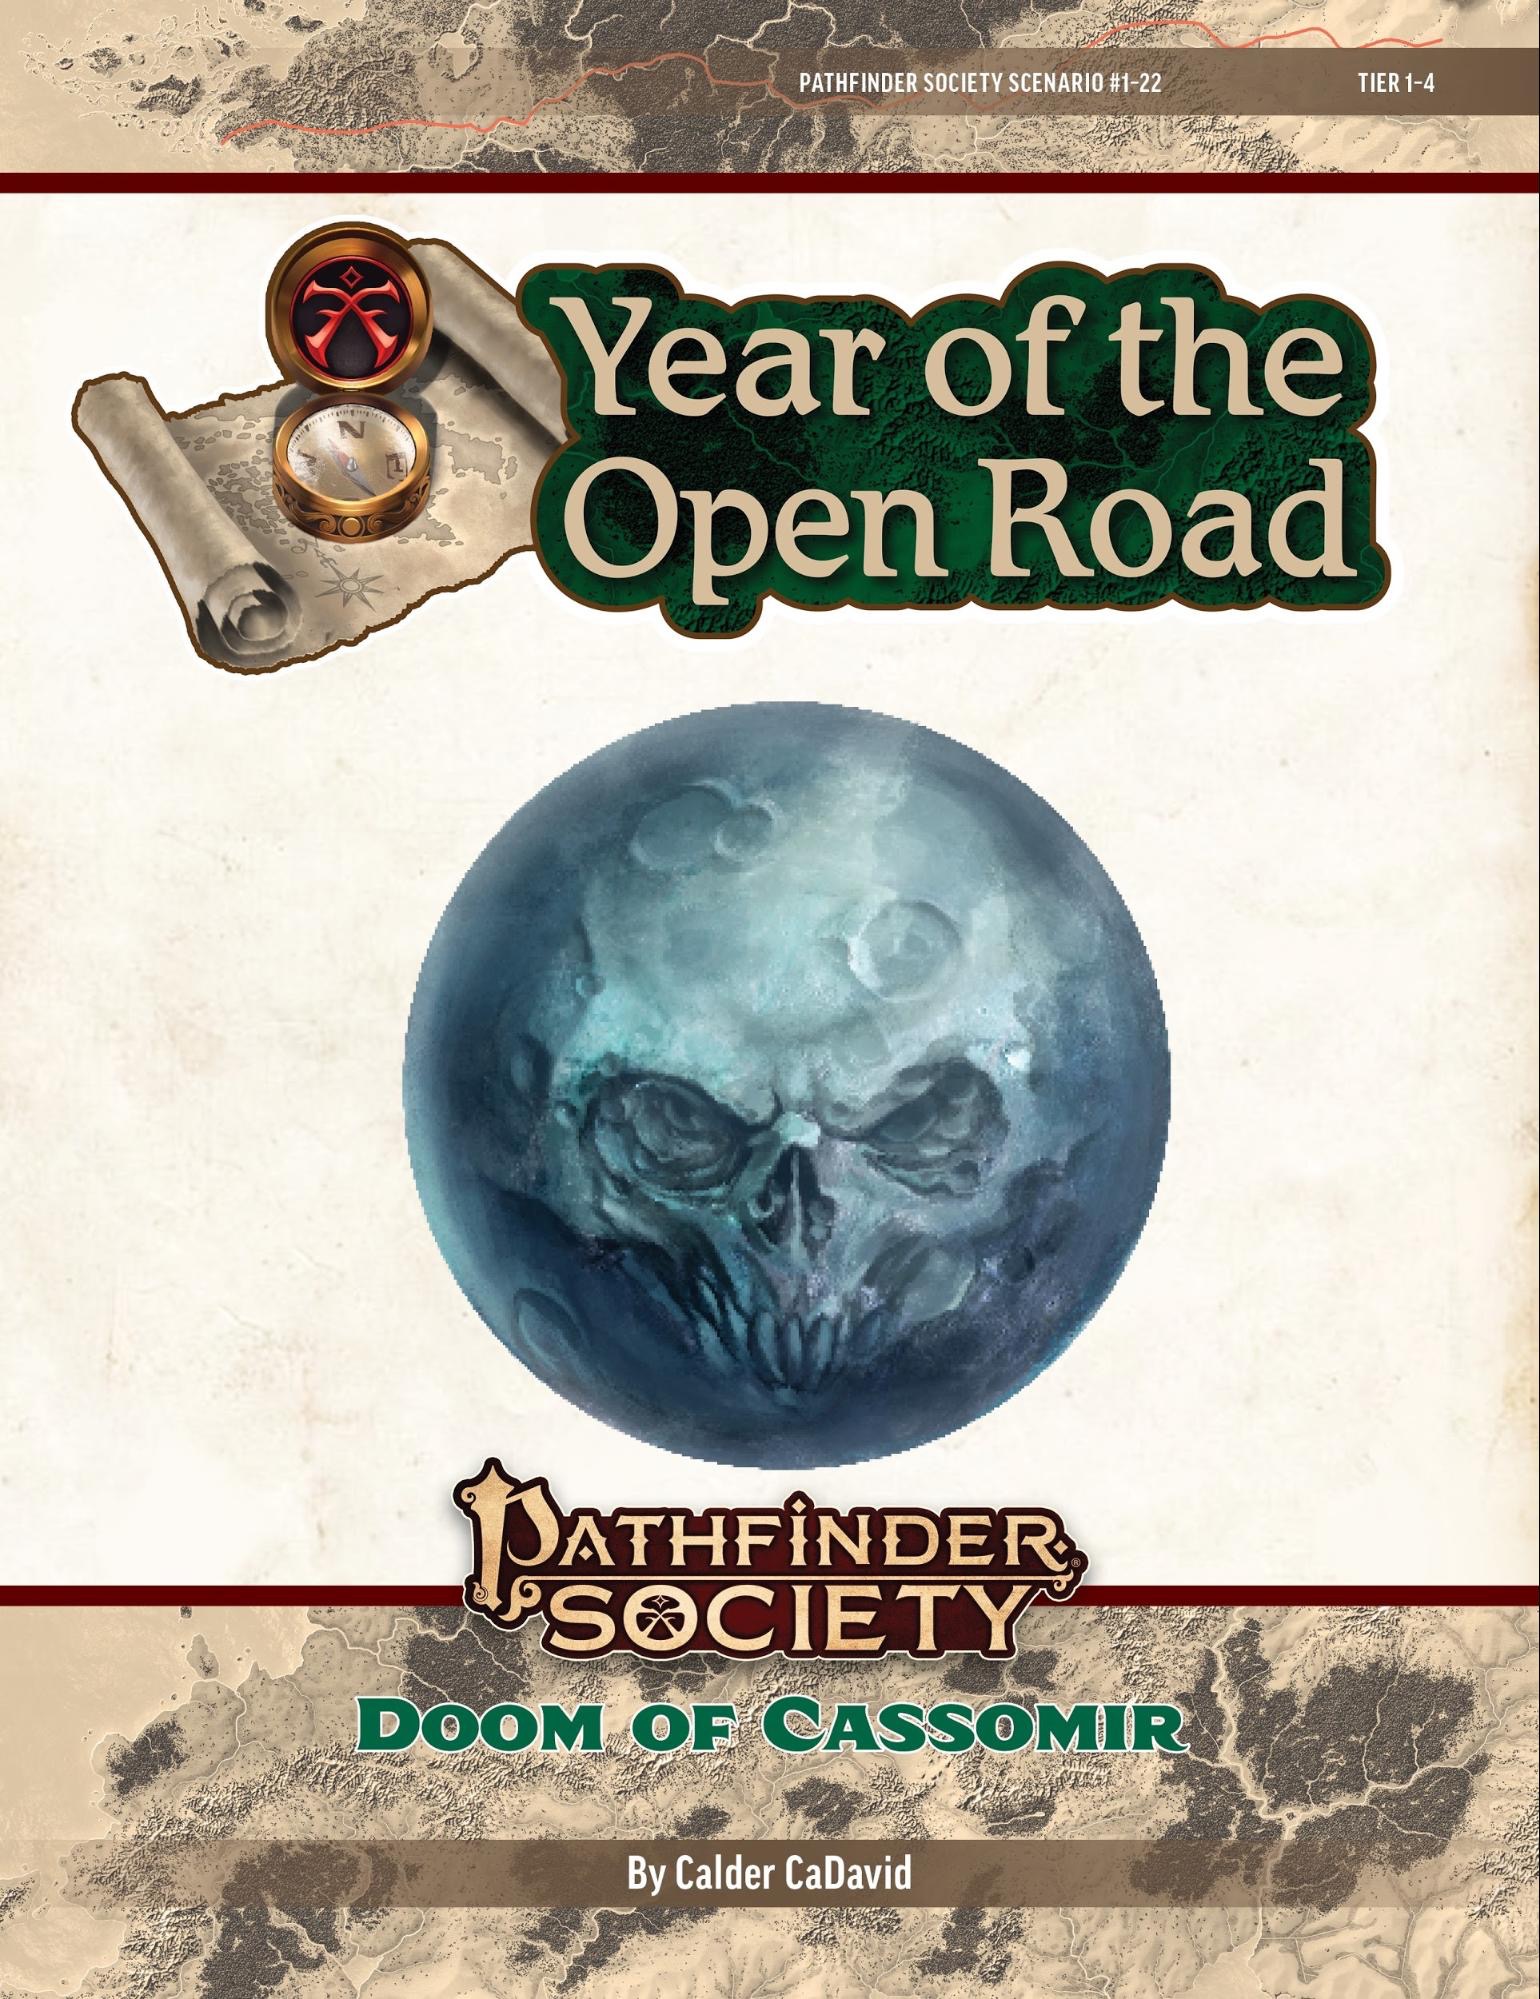 Pathfinder Society Year of the Open Road: Doom of Cassomir cover. Illustration of a moon on a tan background with a shadow of an ominous skull covering the moon